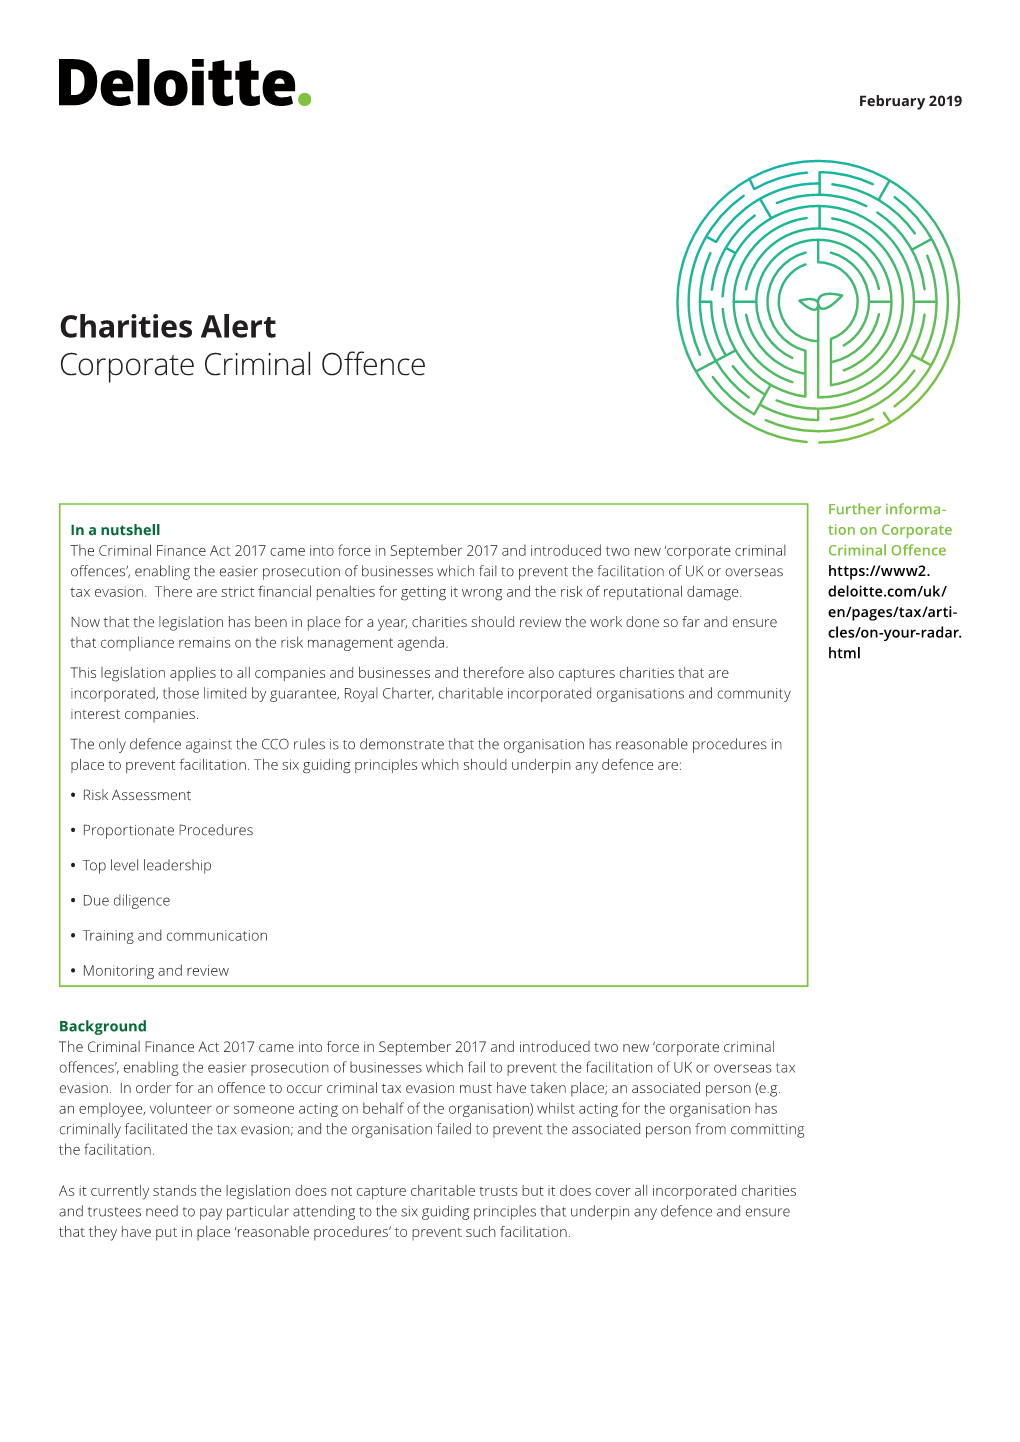 Charities Alert Corporate Criminal Offence